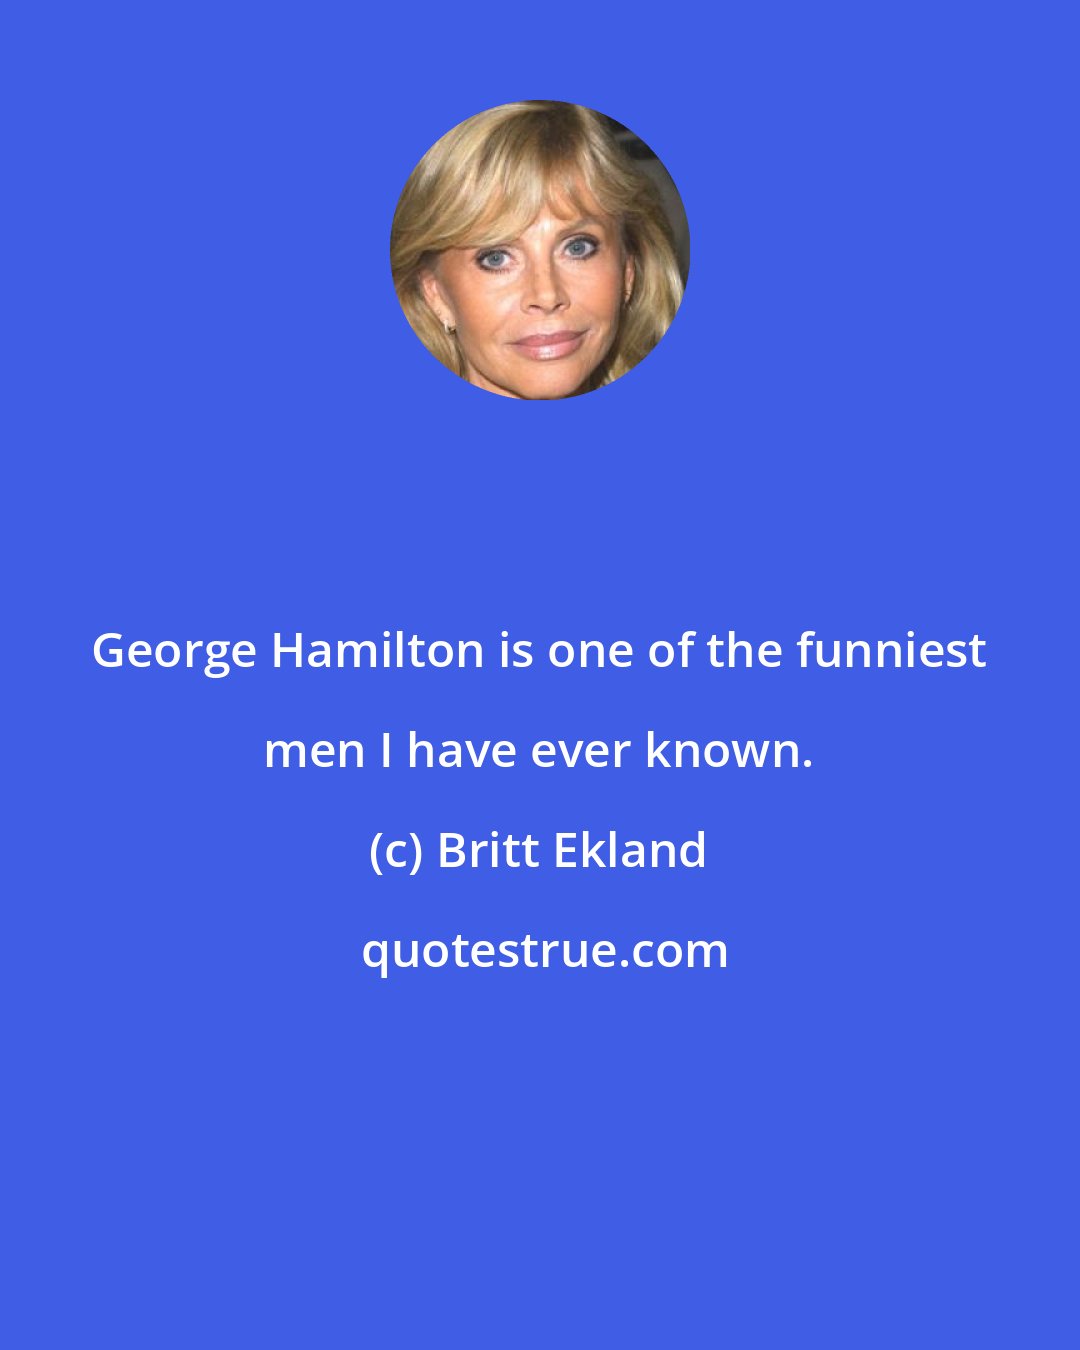 Britt Ekland: George Hamilton is one of the funniest men I have ever known.